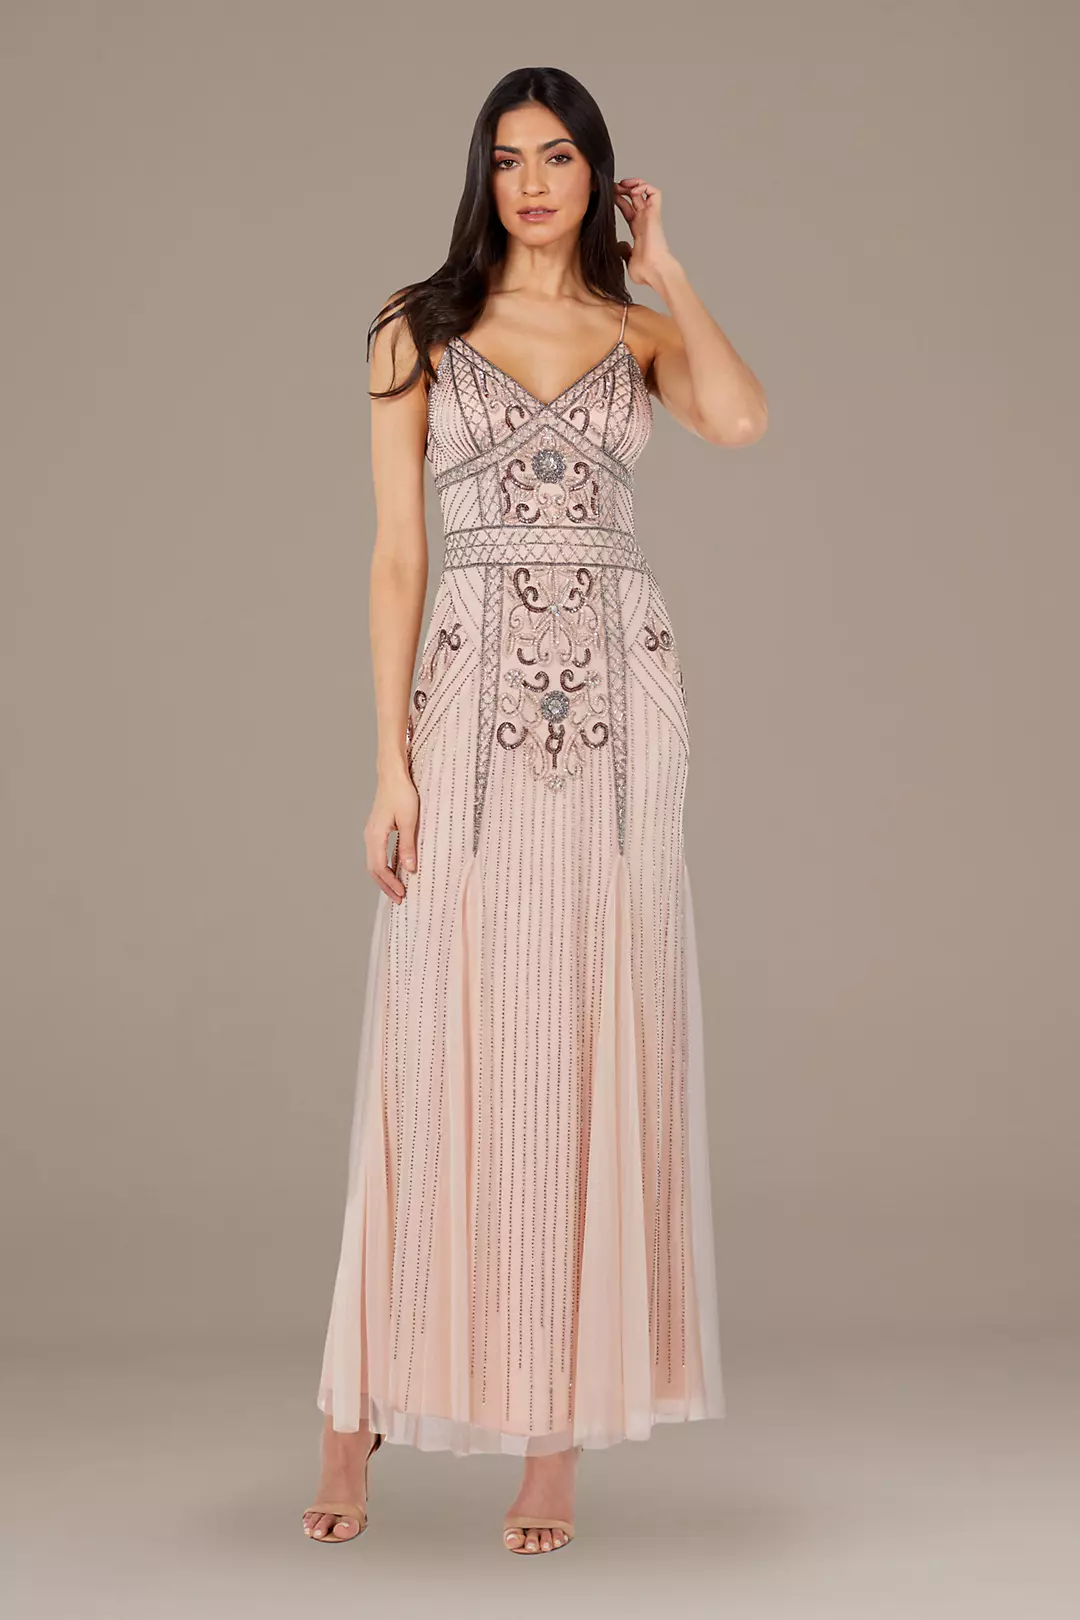 Bead-Embellished Mesh Overlay Spaghetti Strap Gown Image